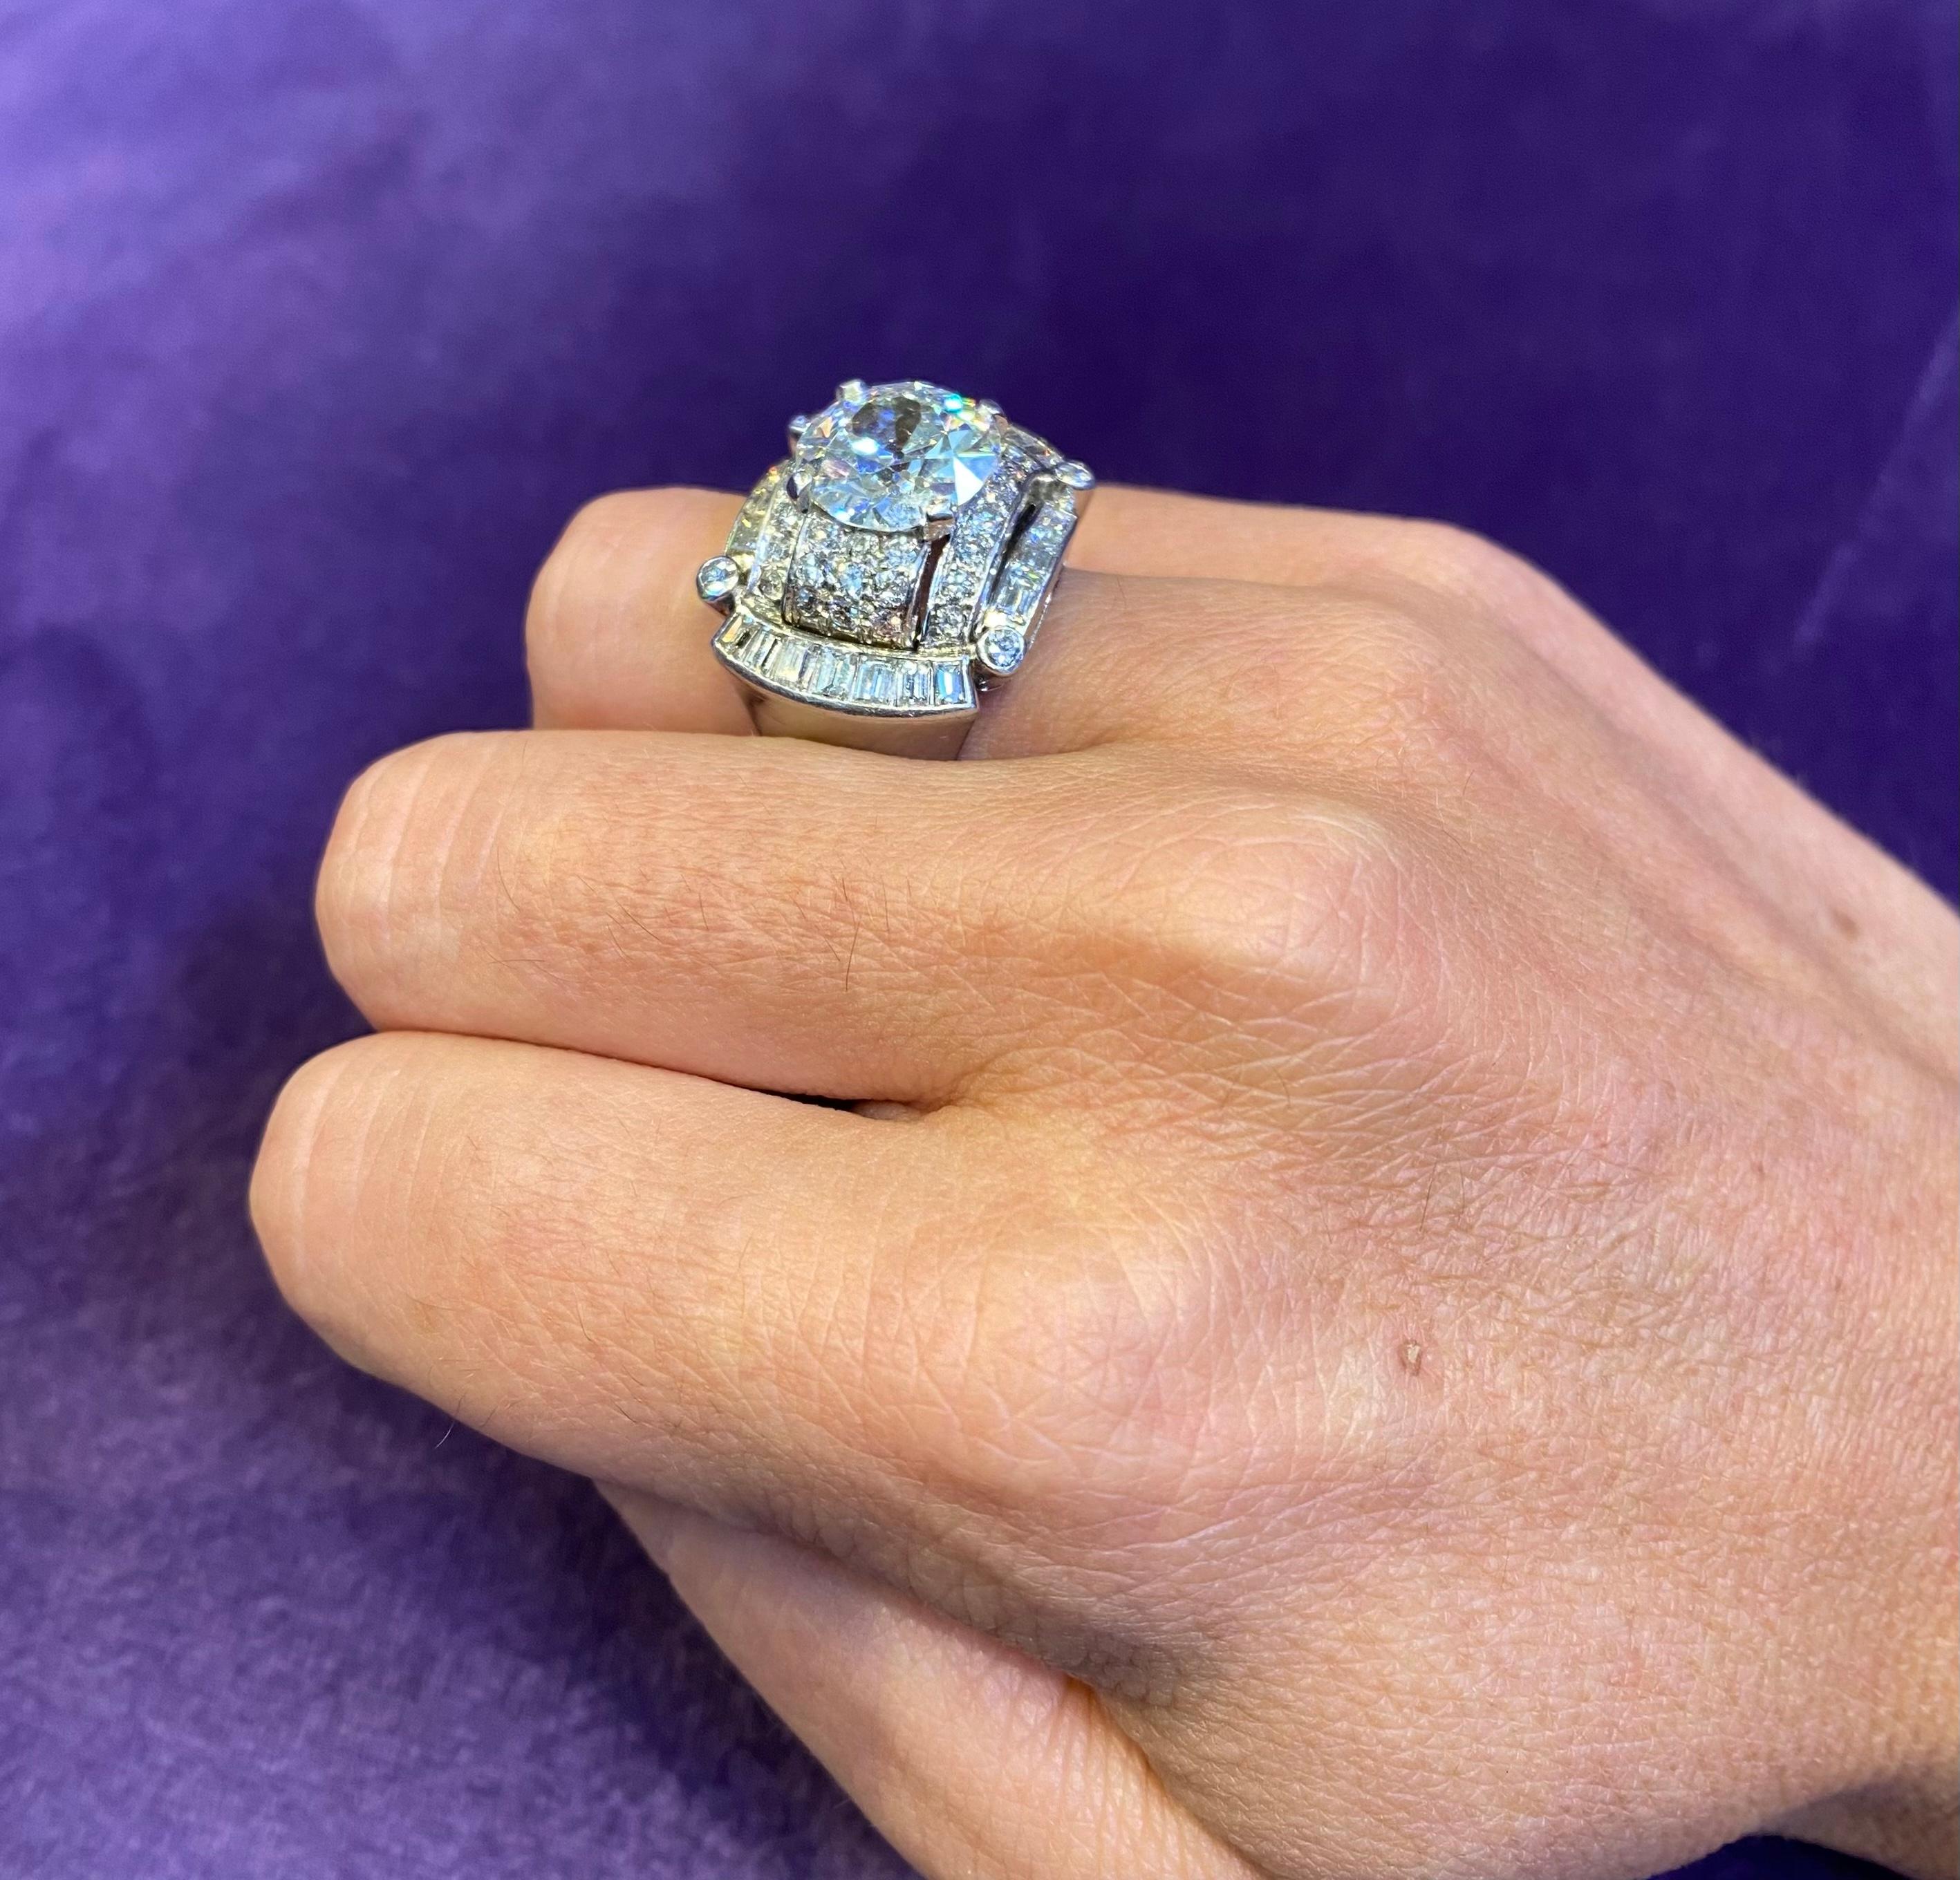 Van Cleef & Arpels Art Deco Diamond Ring  In Excellent Condition For Sale In New York, NY